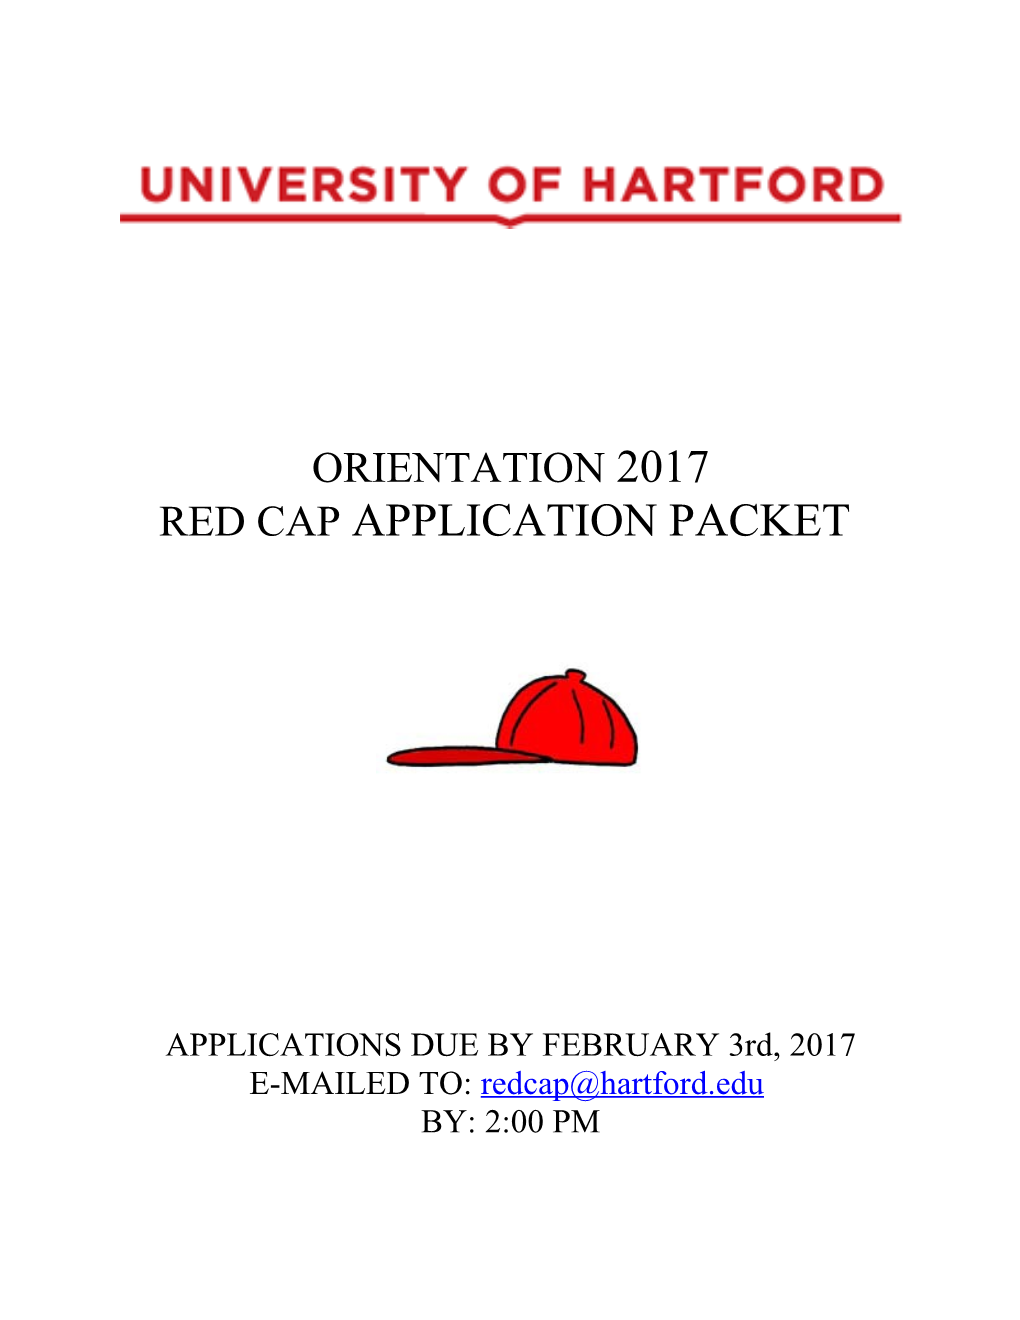 Red Cap Application Packet